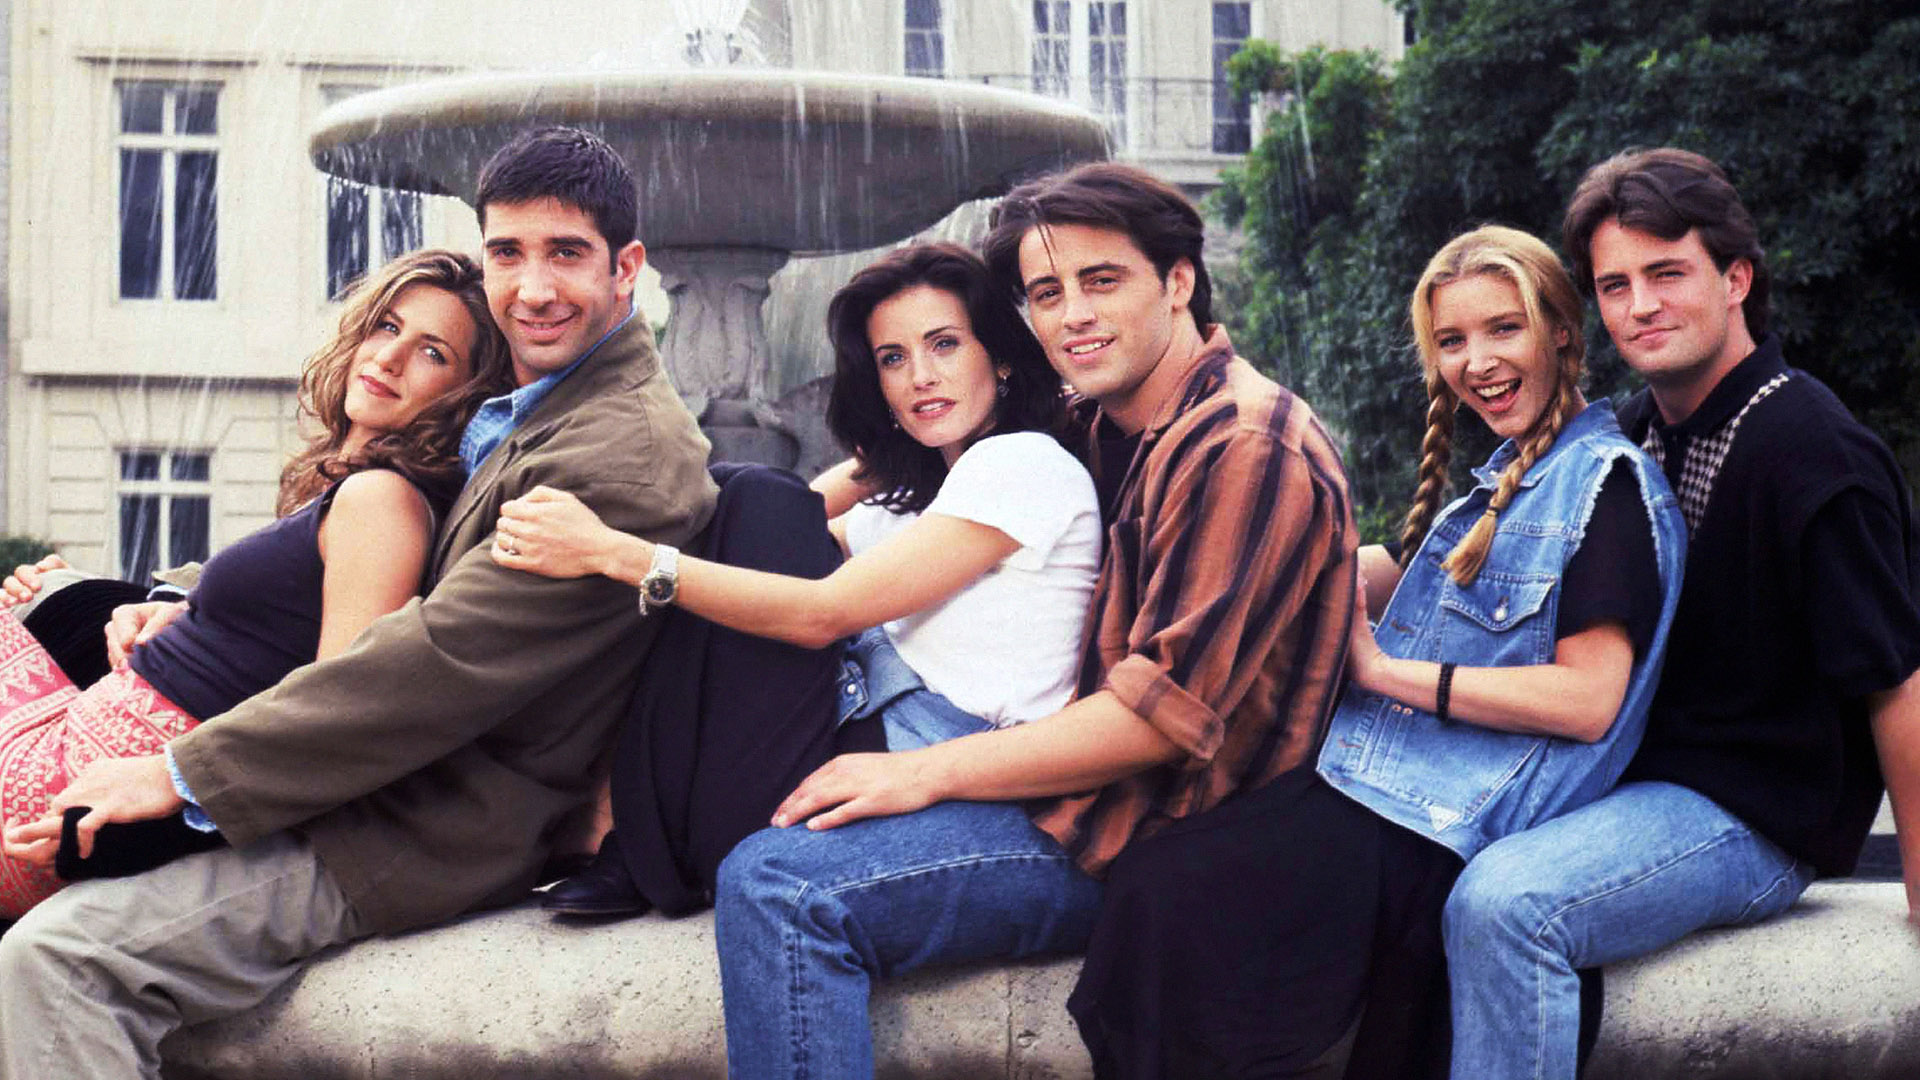 7 Lesser-Known Sitcoms For Those Who Finally Got Sick of Friends & The Office